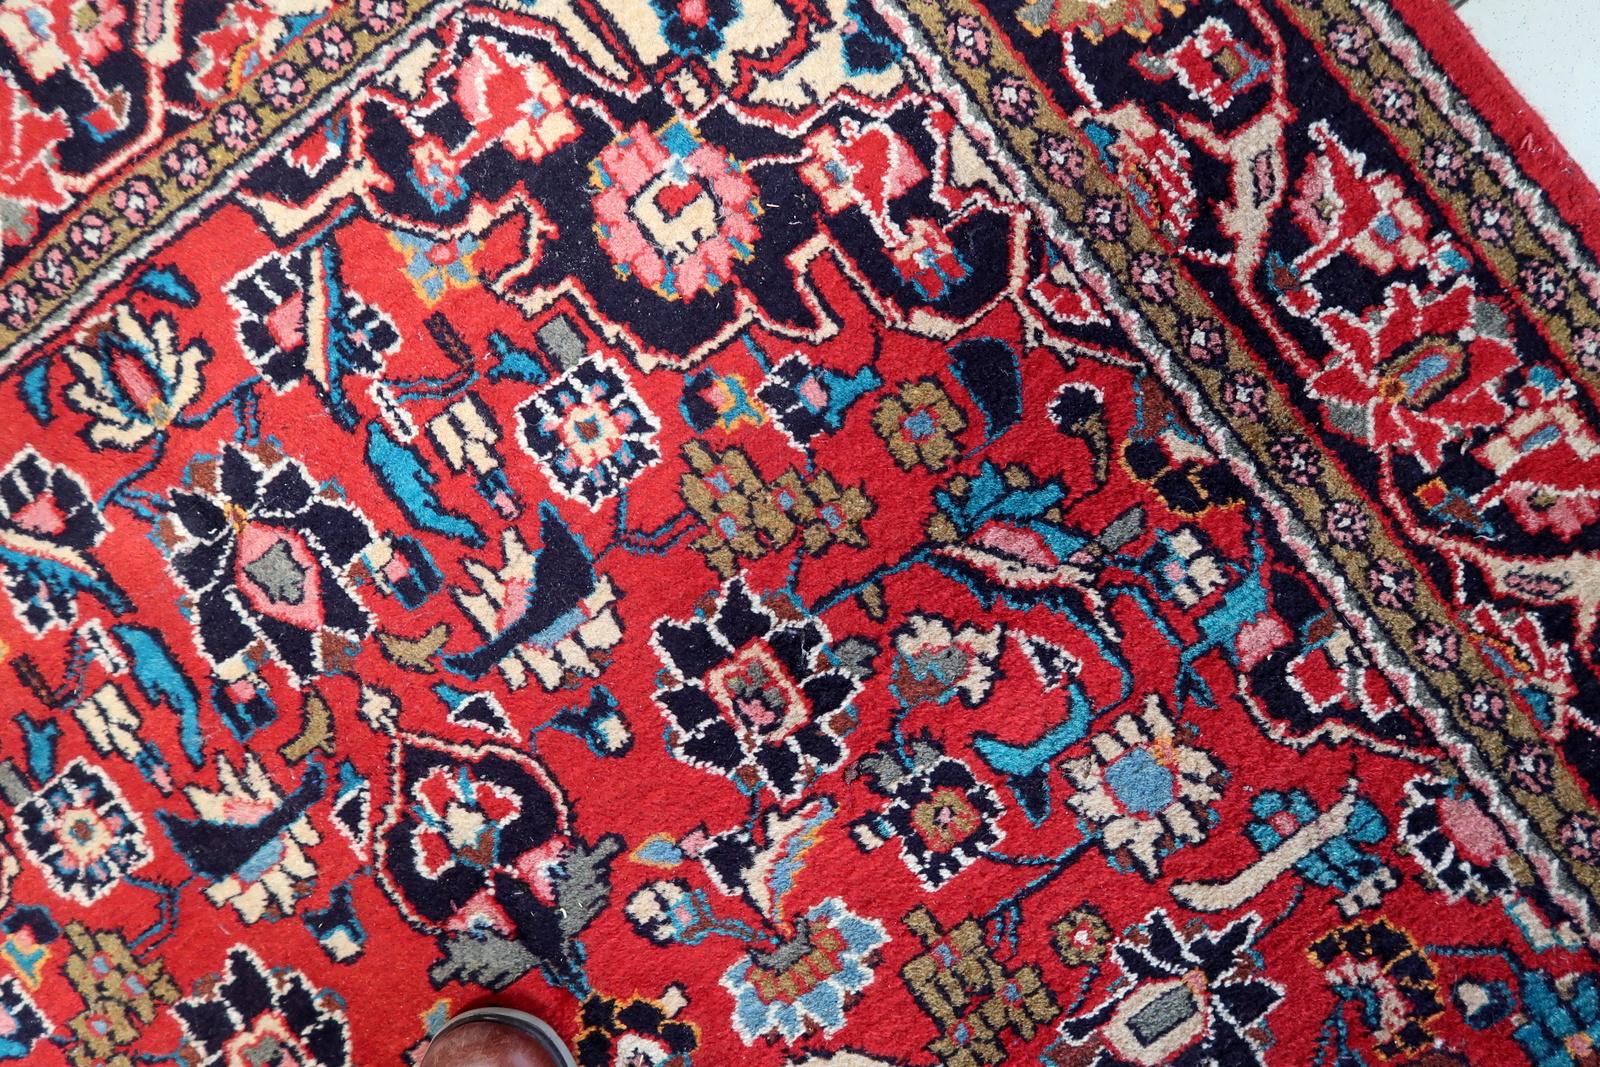 Early 20th Century Handmade Antique Persian Style Kashan Rug 4.2' x 6.5', 1920s - 1C1119 For Sale